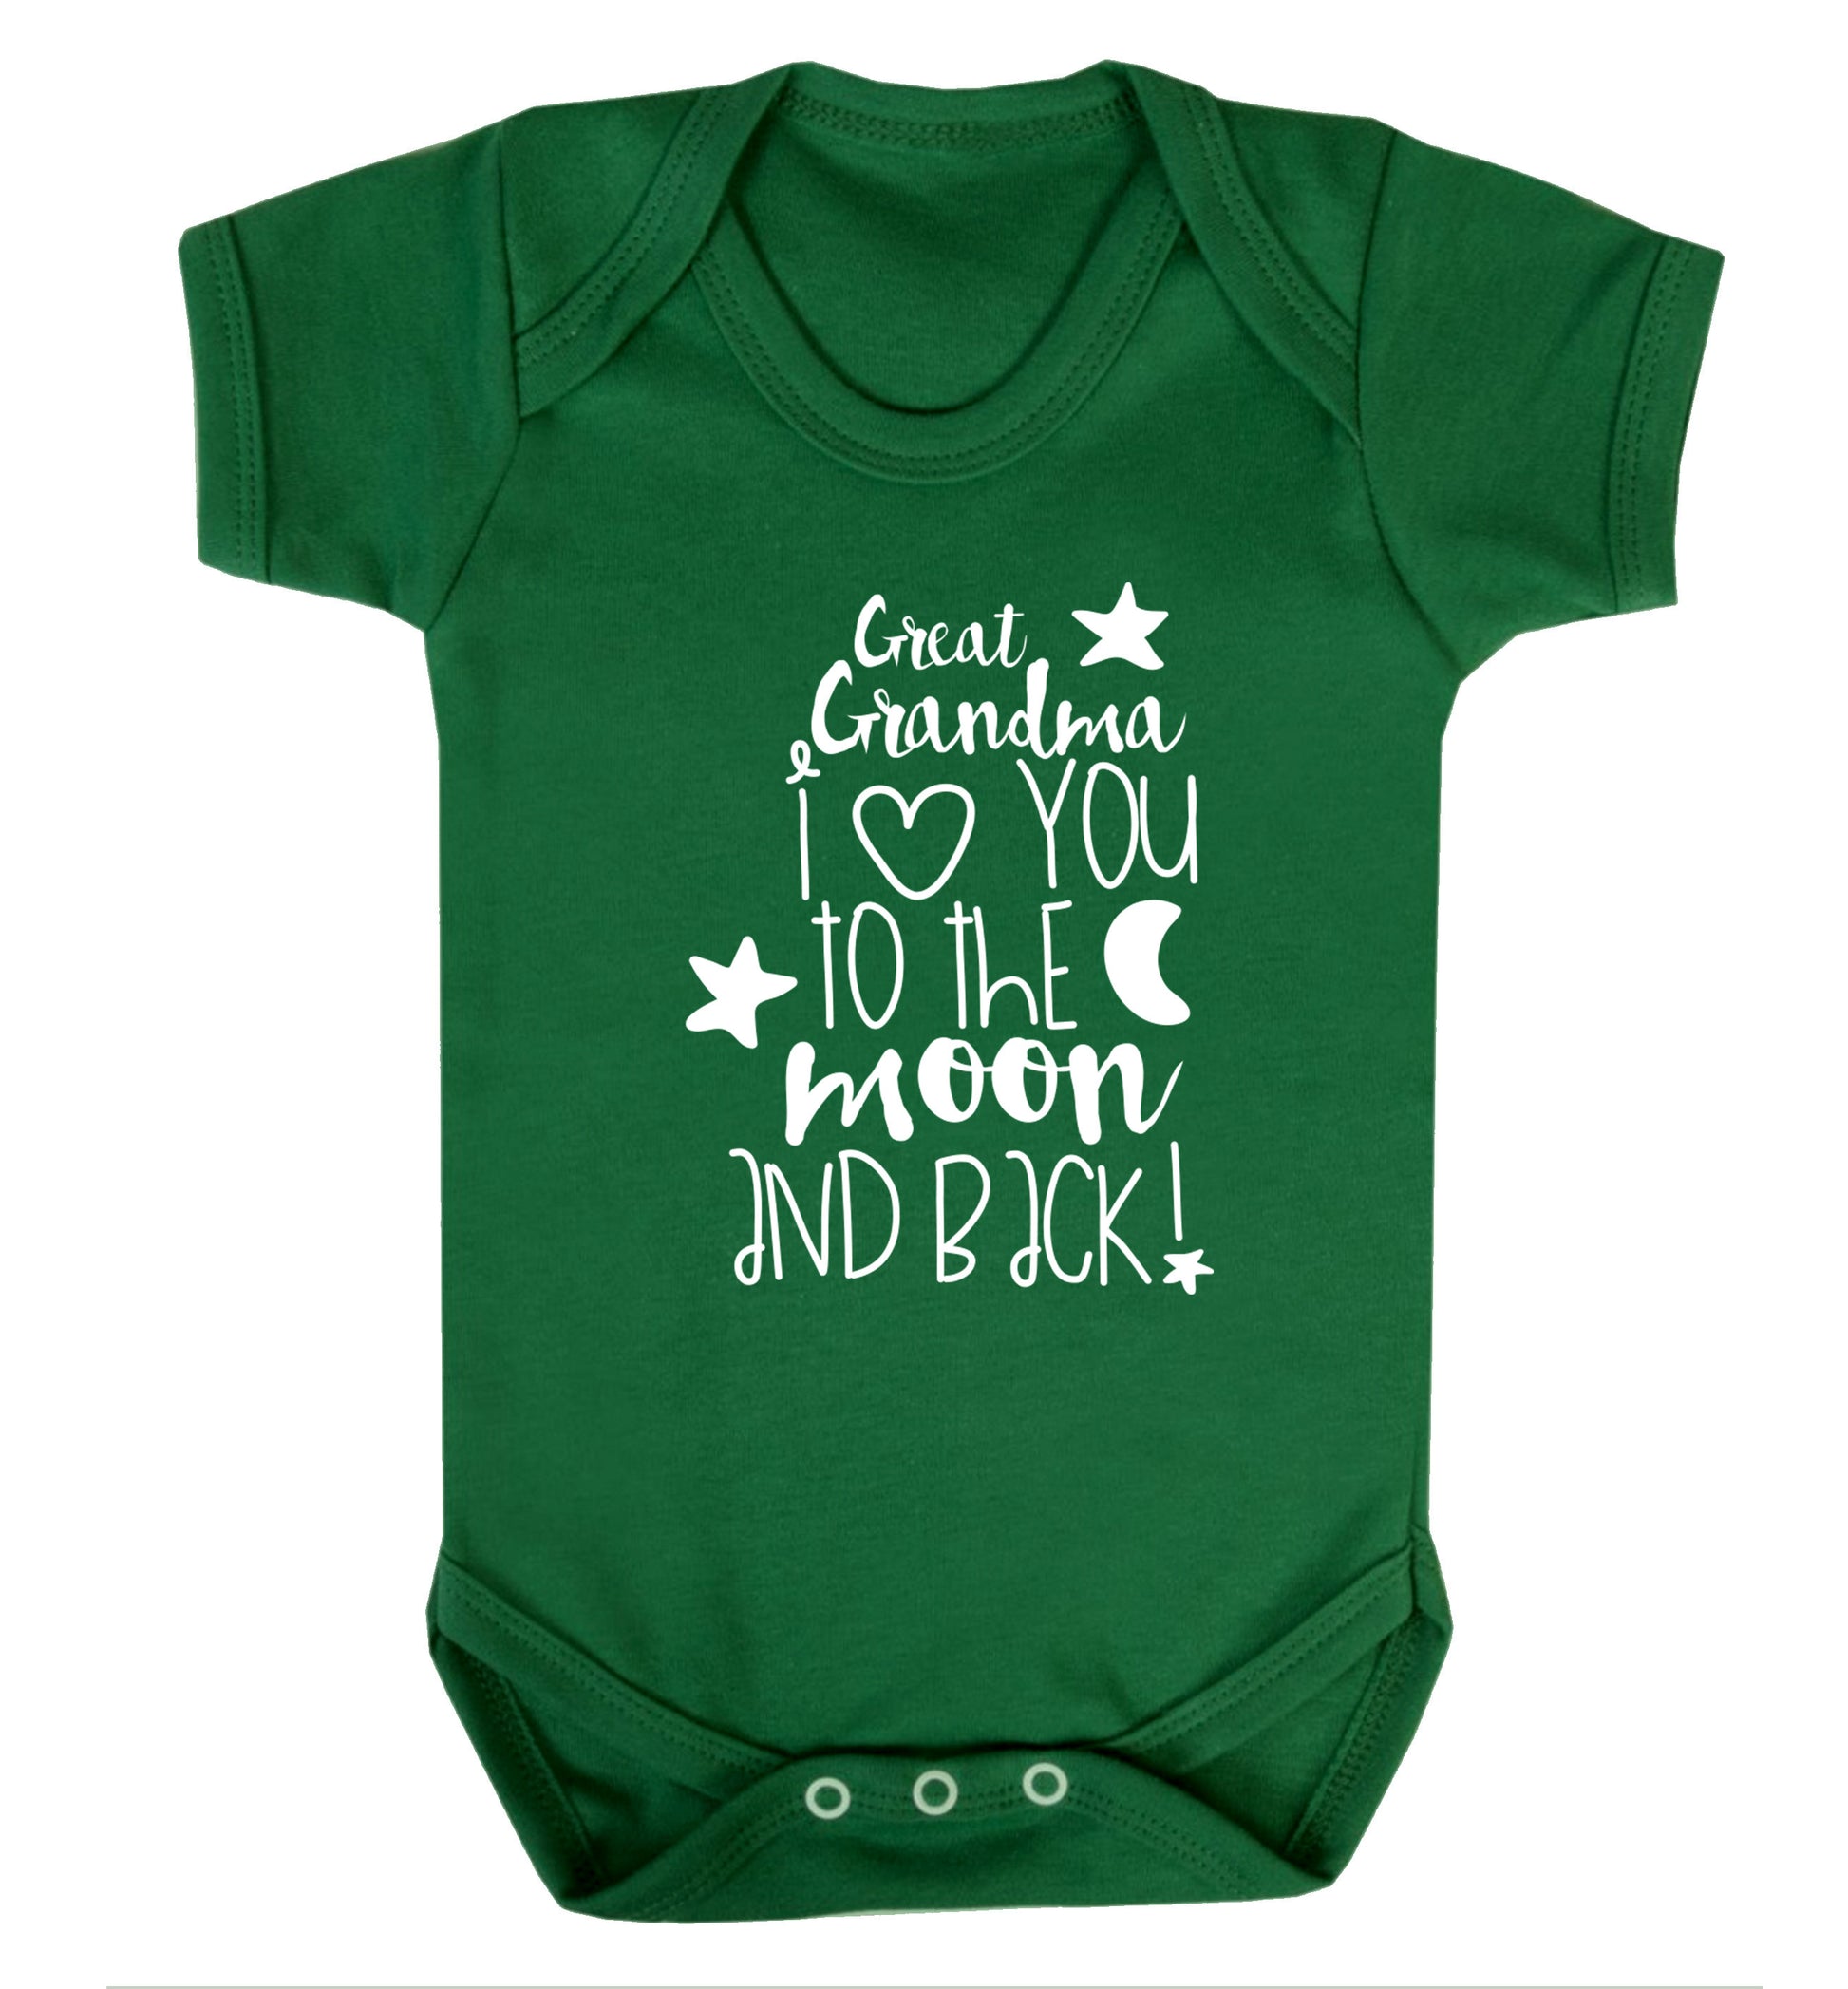 Great Grandma I love you to the moon and back Baby Vest green 18-24 months